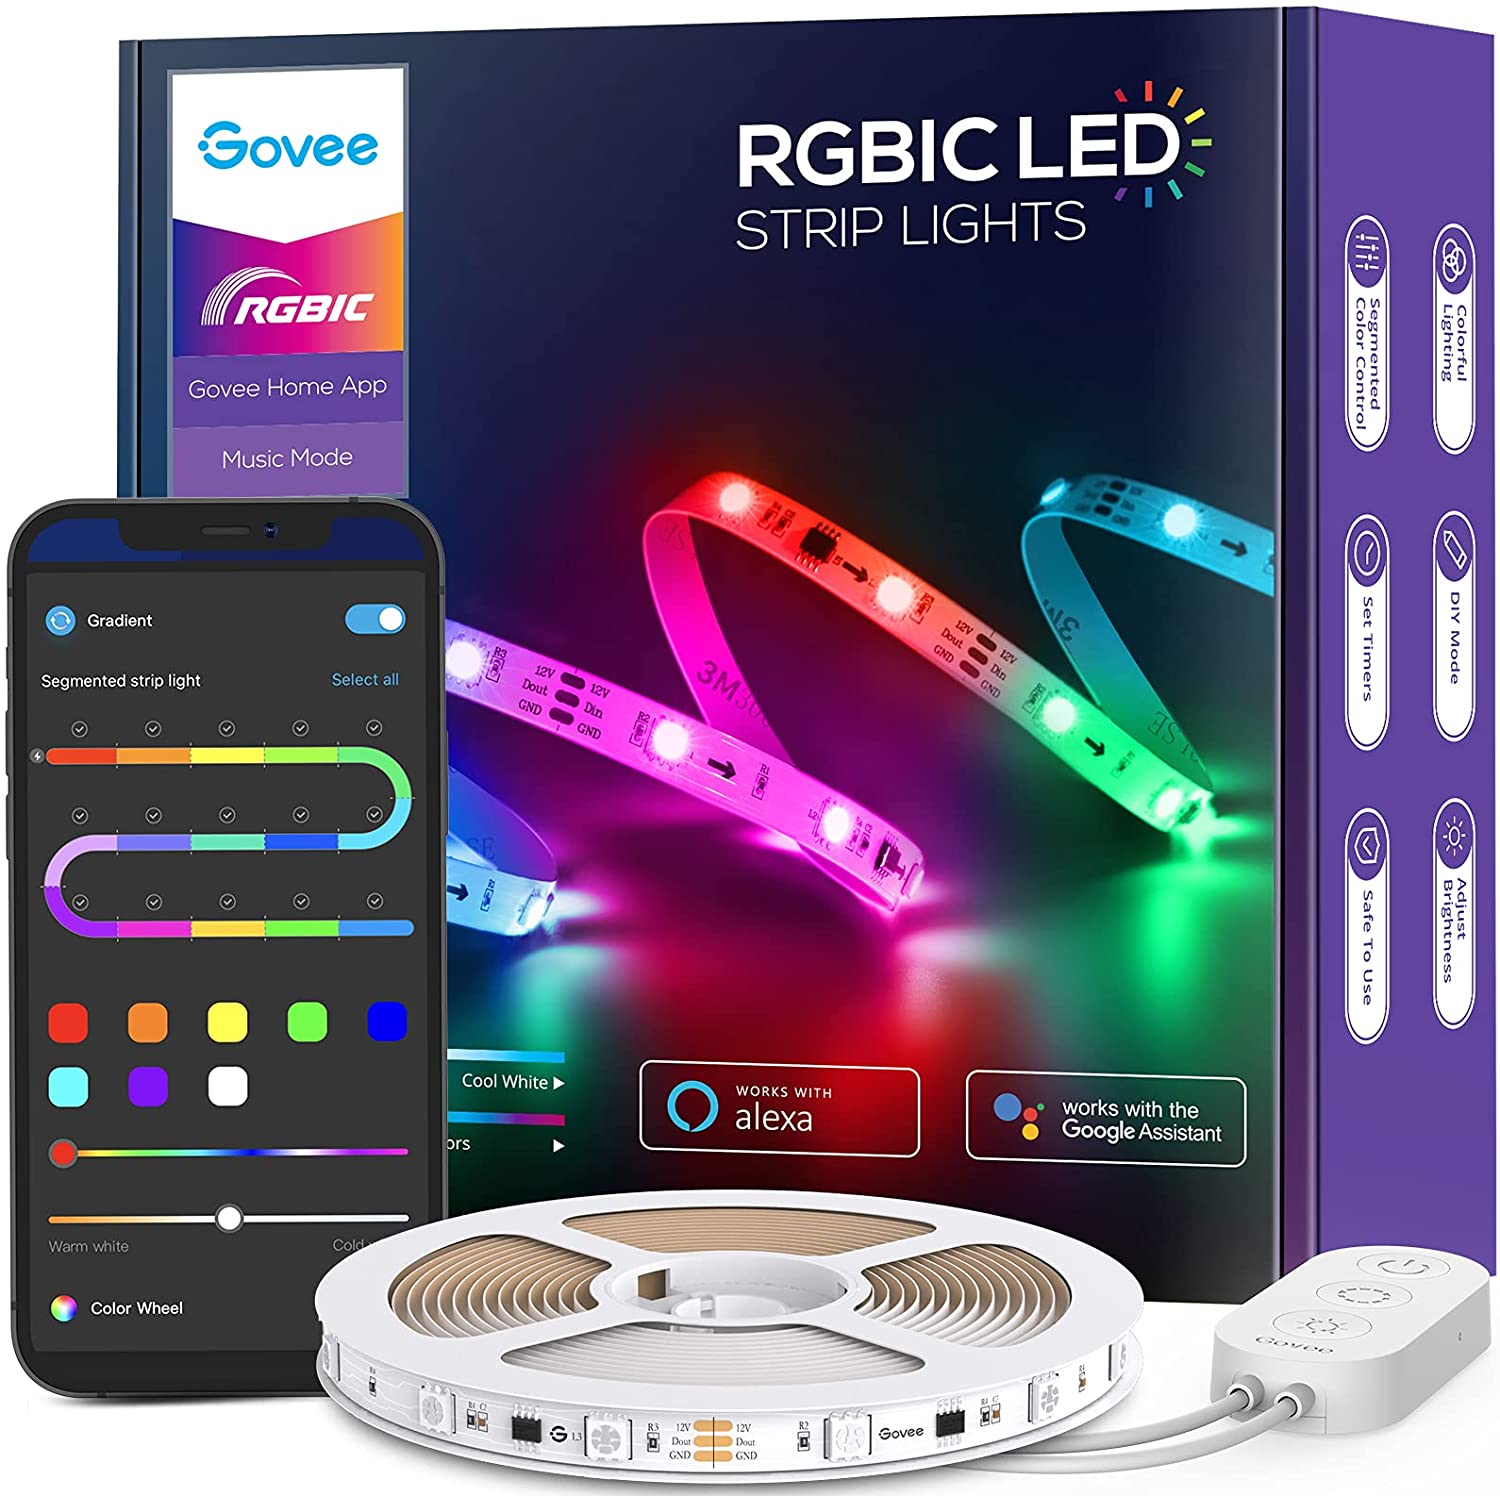 Govee RGBIC Alexa LED Strip Lights, Smart Segmented Color Control, 16.4ft WiFi, App LED Lights Work with Alexa and Google Assistant, Music Sync $26.39 + Free shipping w/Prime